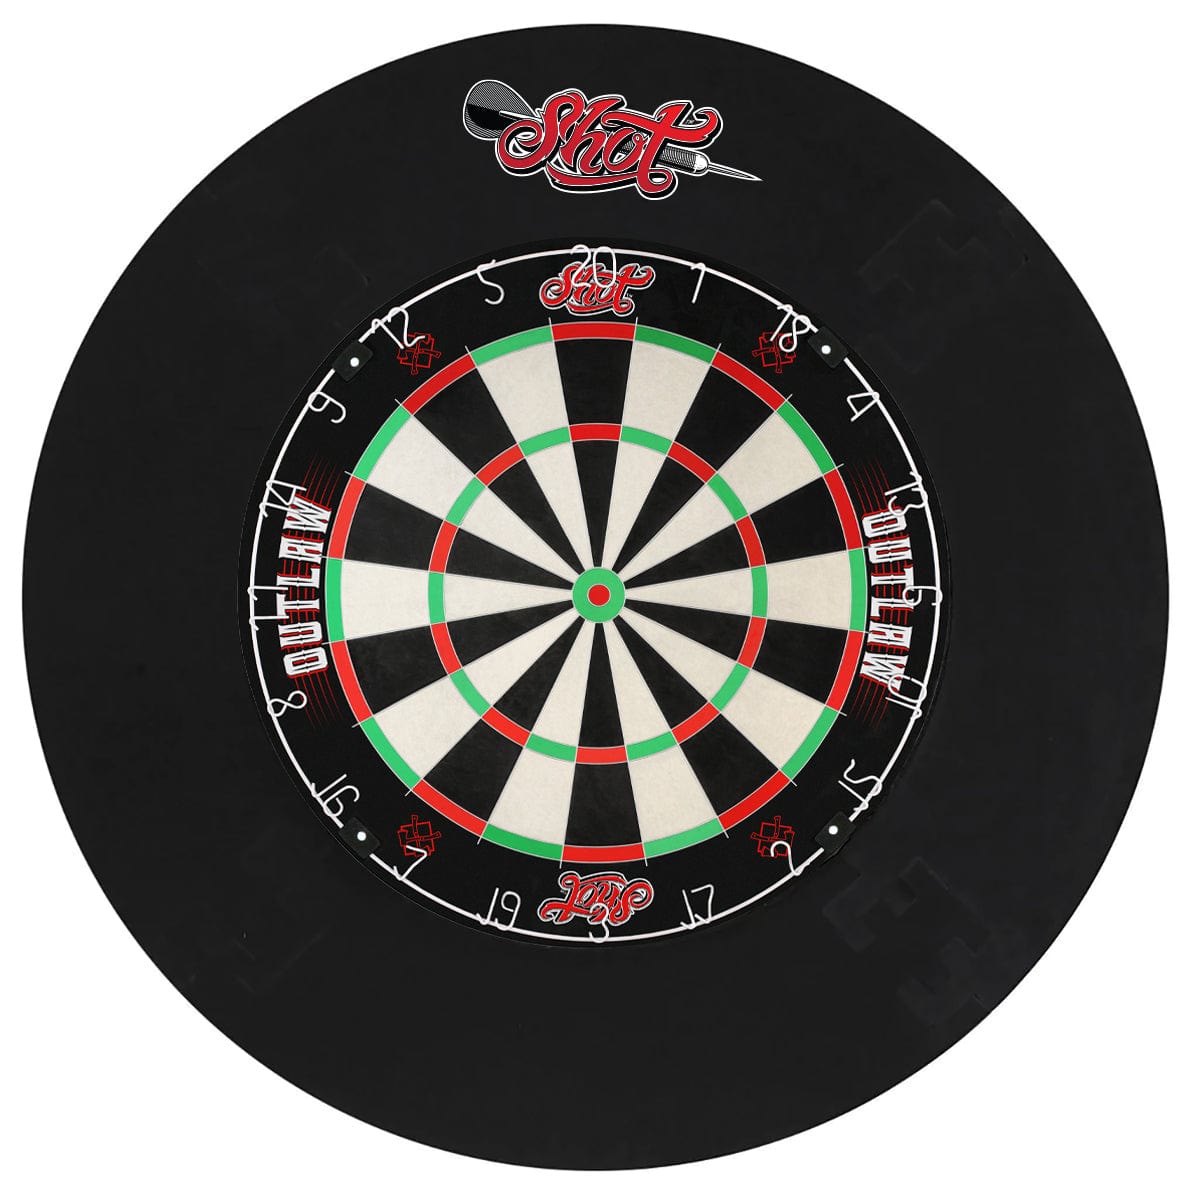 Shot Outlaw Tournament Darts Set - Surround, Board and Accessories